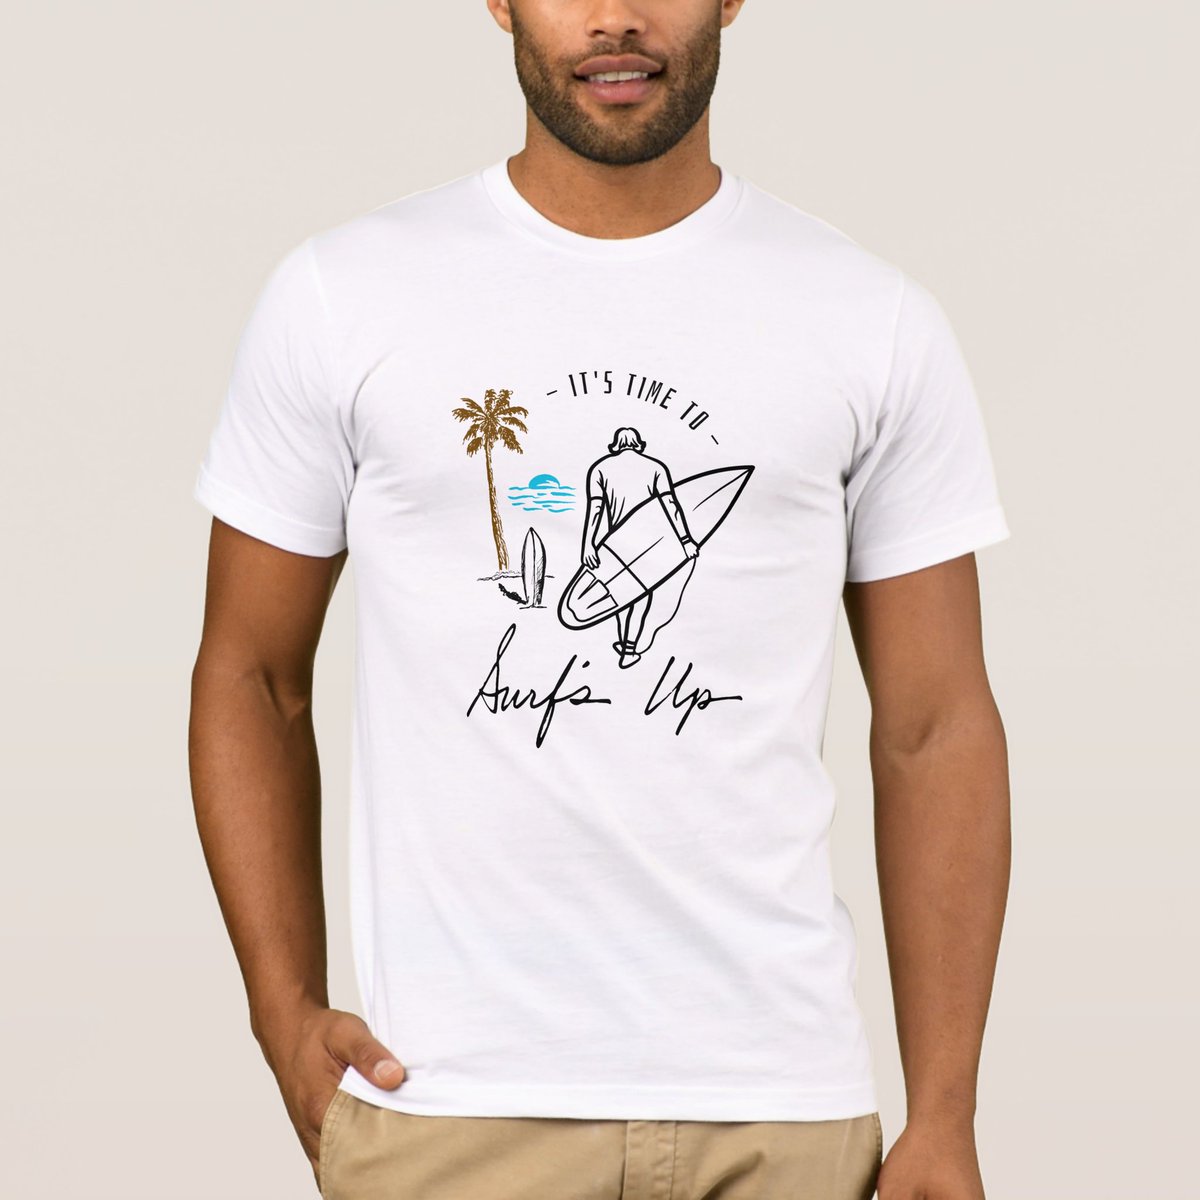 Save 15% with code LETSPARTYNOW
#SurfStyle
#BeachLife
#SurfingVibes
#OceanAdventures
#SummerSwag
#RideTheWave
#SurfLife
#BeachFashion
#WavesCalling
#SurfBoarding
'Surf's Up:Dive into Adventure with Our White Tee' T-Shirt zazzle.com/z/xfexobok?rf=… via @zazzle